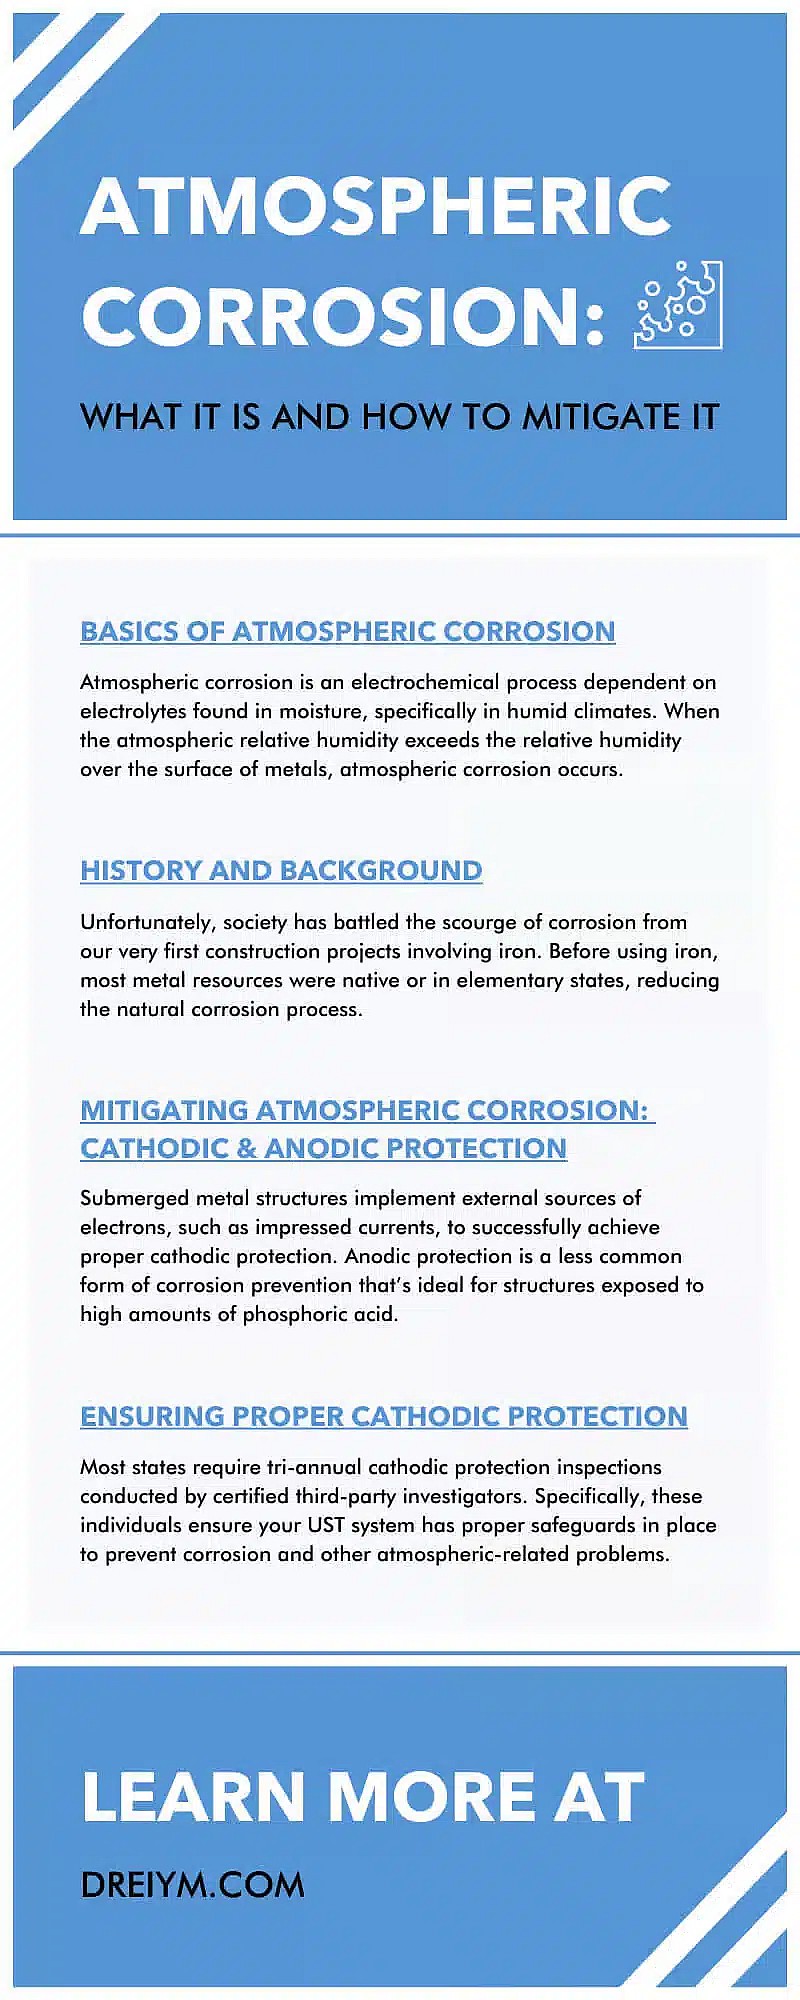 Atmospheric Corrosion: What It Is and How To Mitigate It